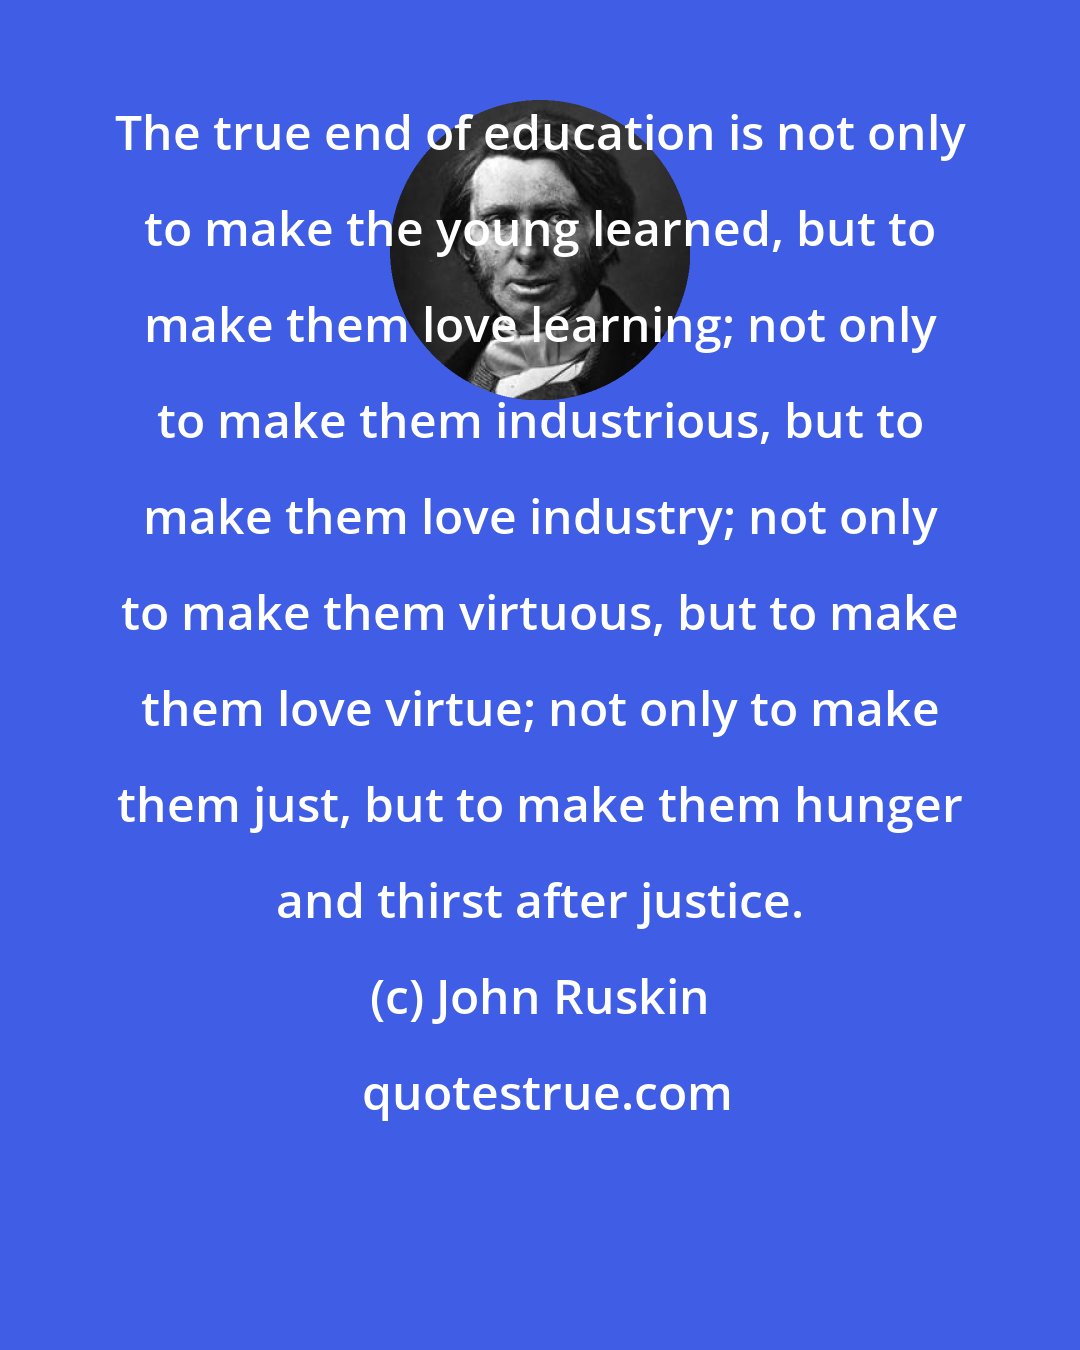 John Ruskin: The true end of education is not only to make the young learned, but to make them love learning; not only to make them industrious, but to make them love industry; not only to make them virtuous, but to make them love virtue; not only to make them just, but to make them hunger and thirst after justice.